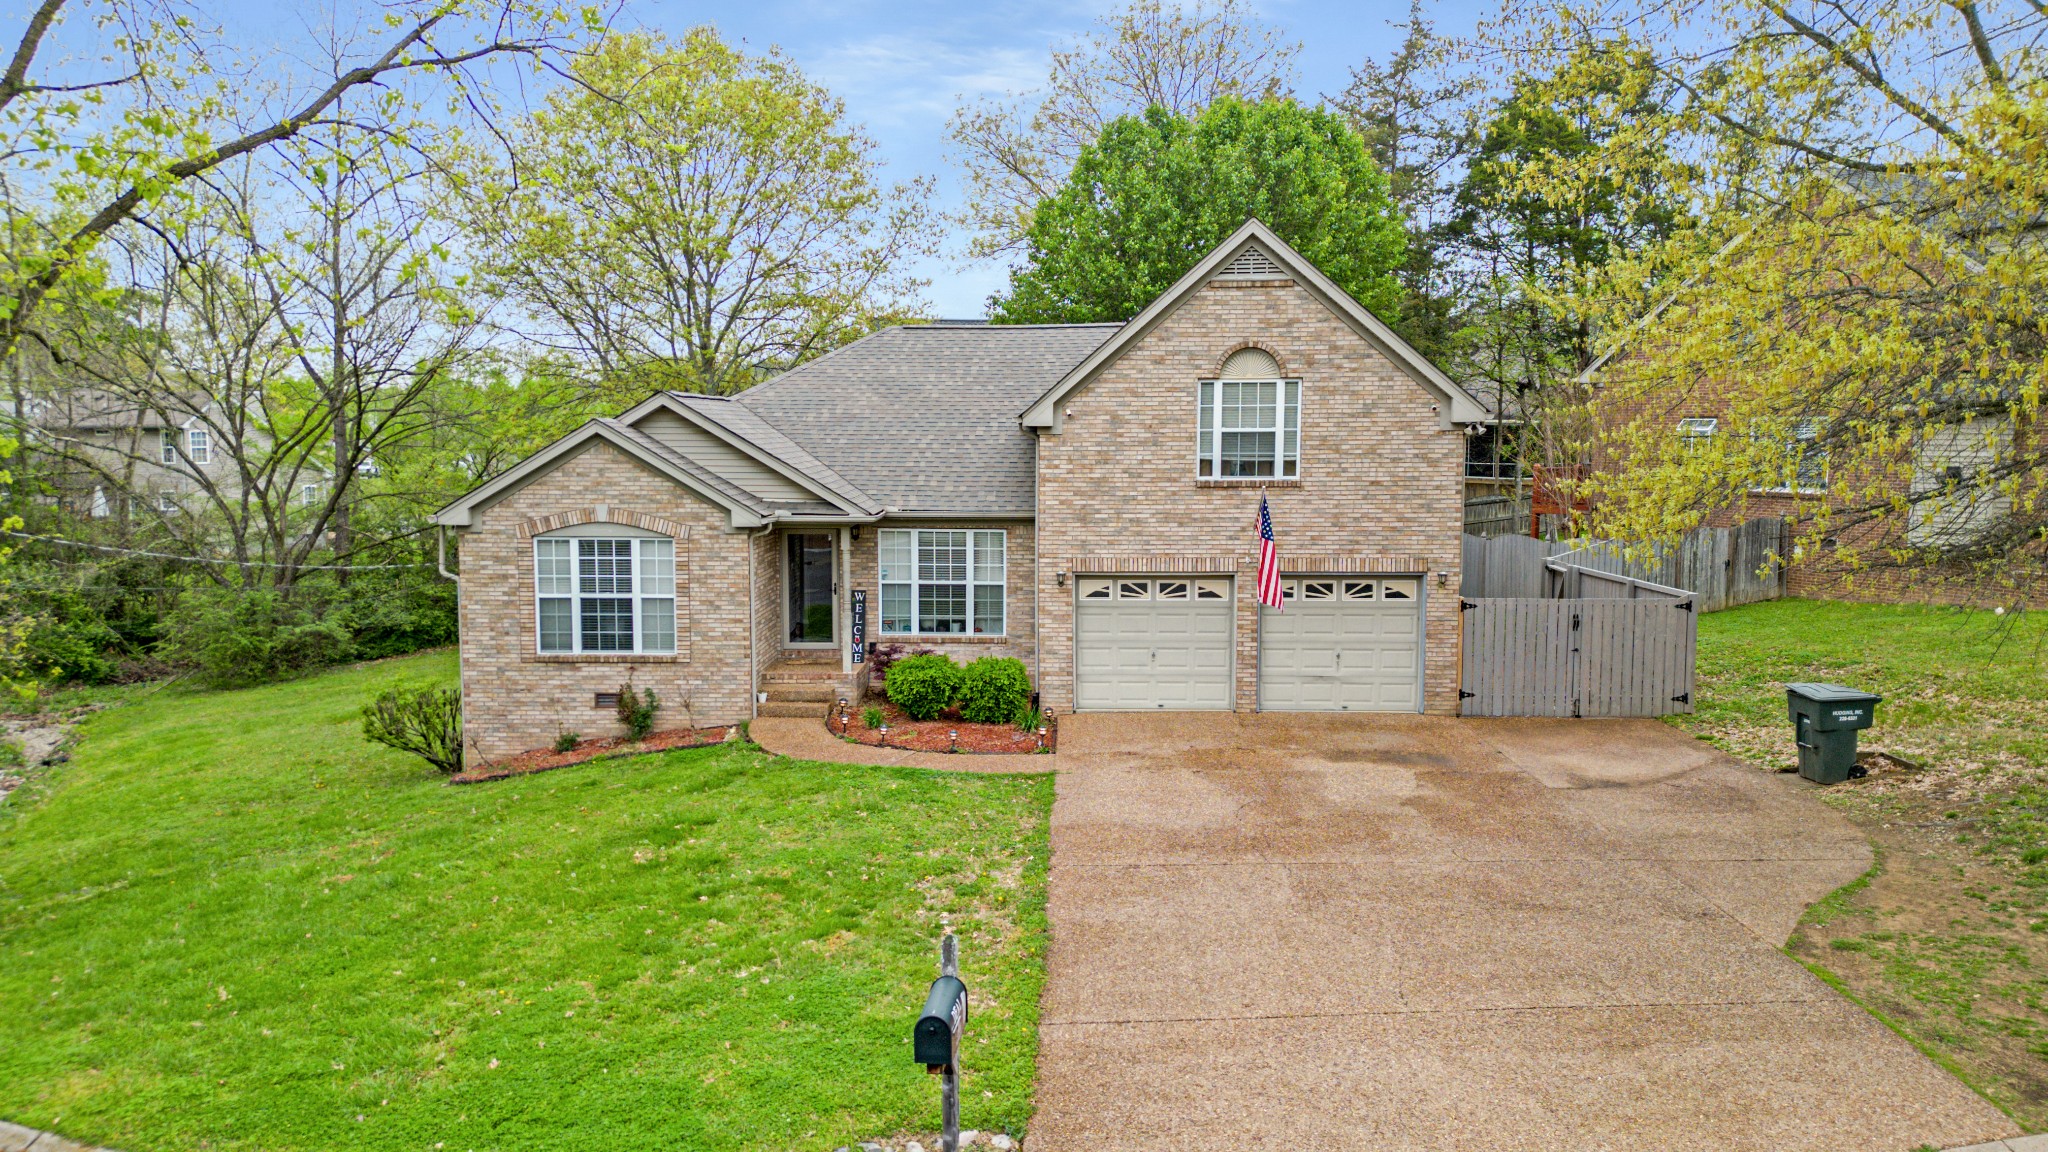 View Old Hickory, TN 37138 house